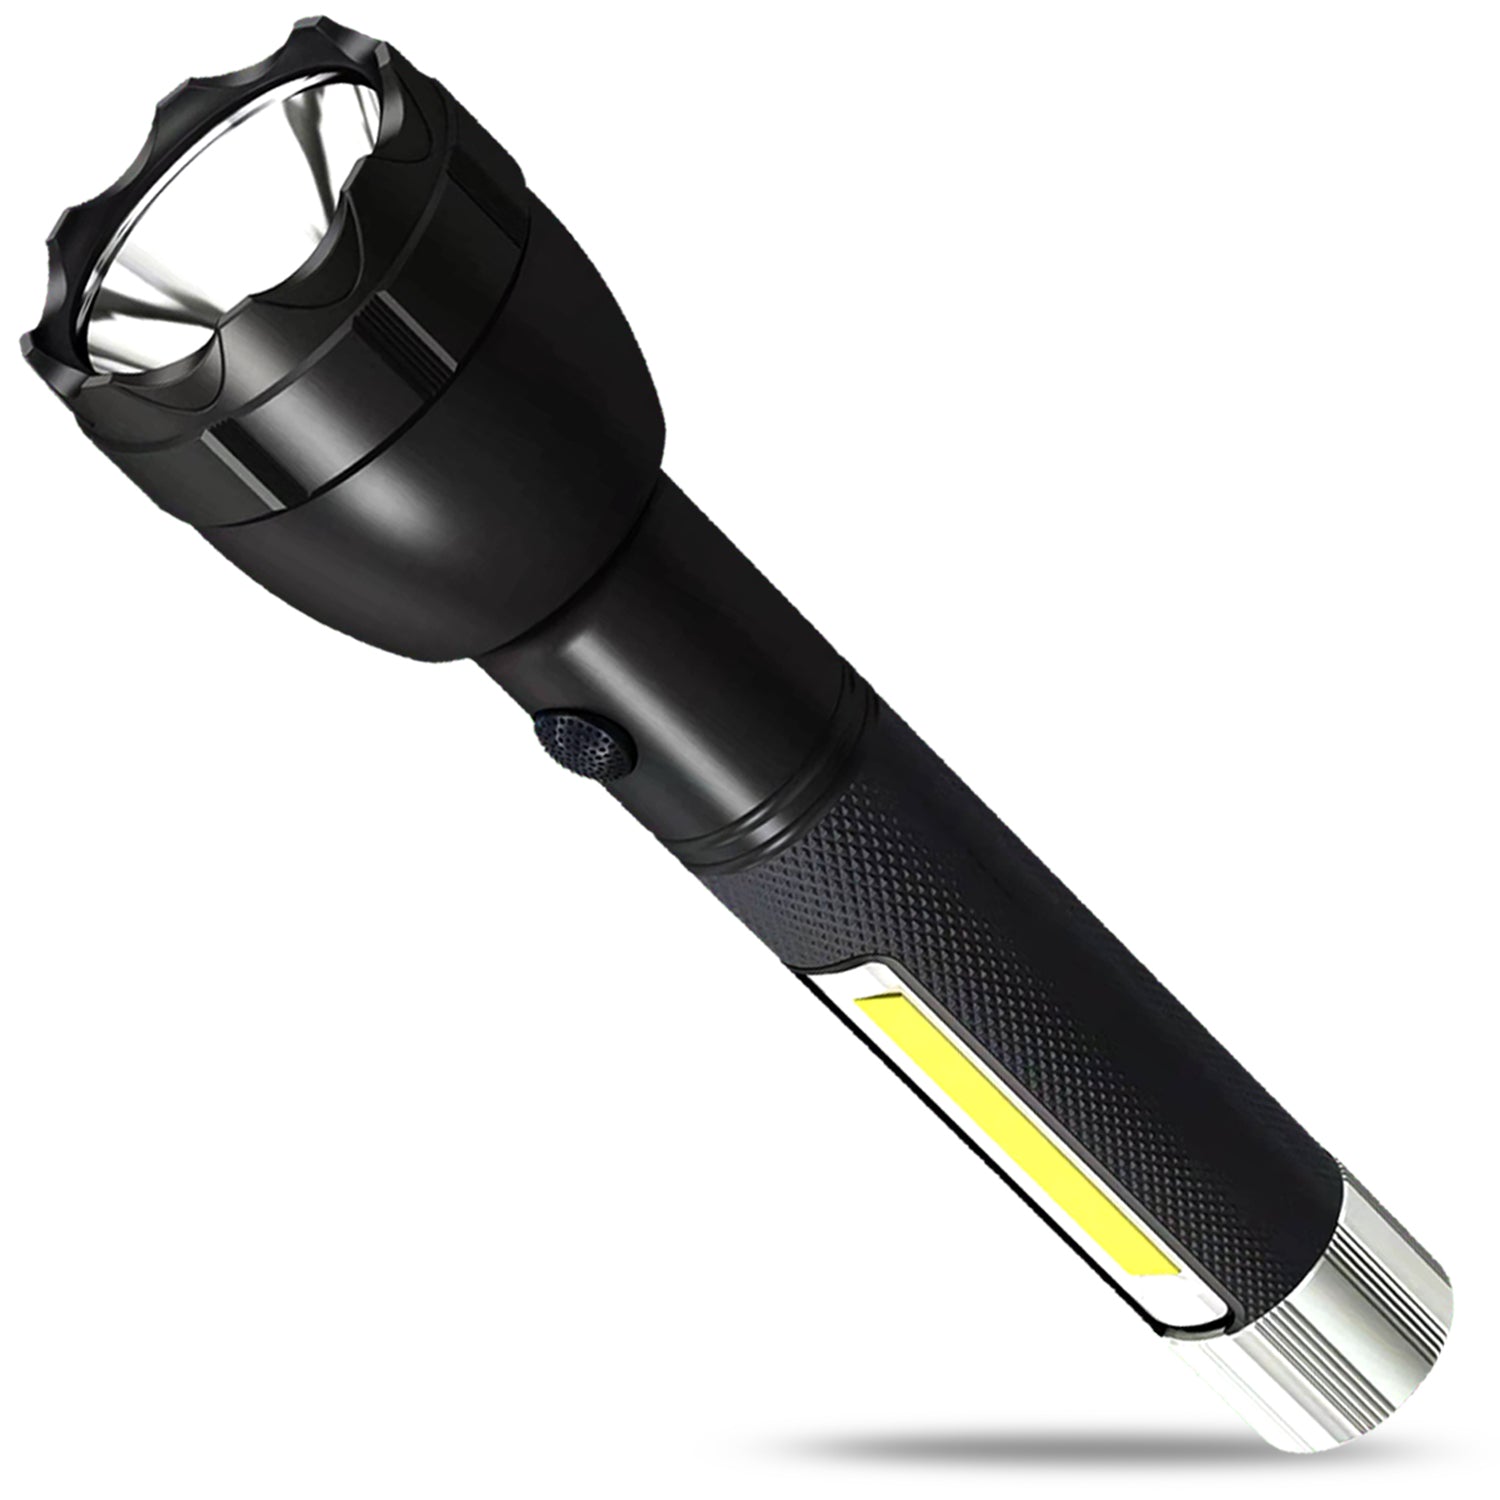 Pick Ur Needs Dual Mode 20W Power Full LED Rechargeable Torch With Small  Back Light